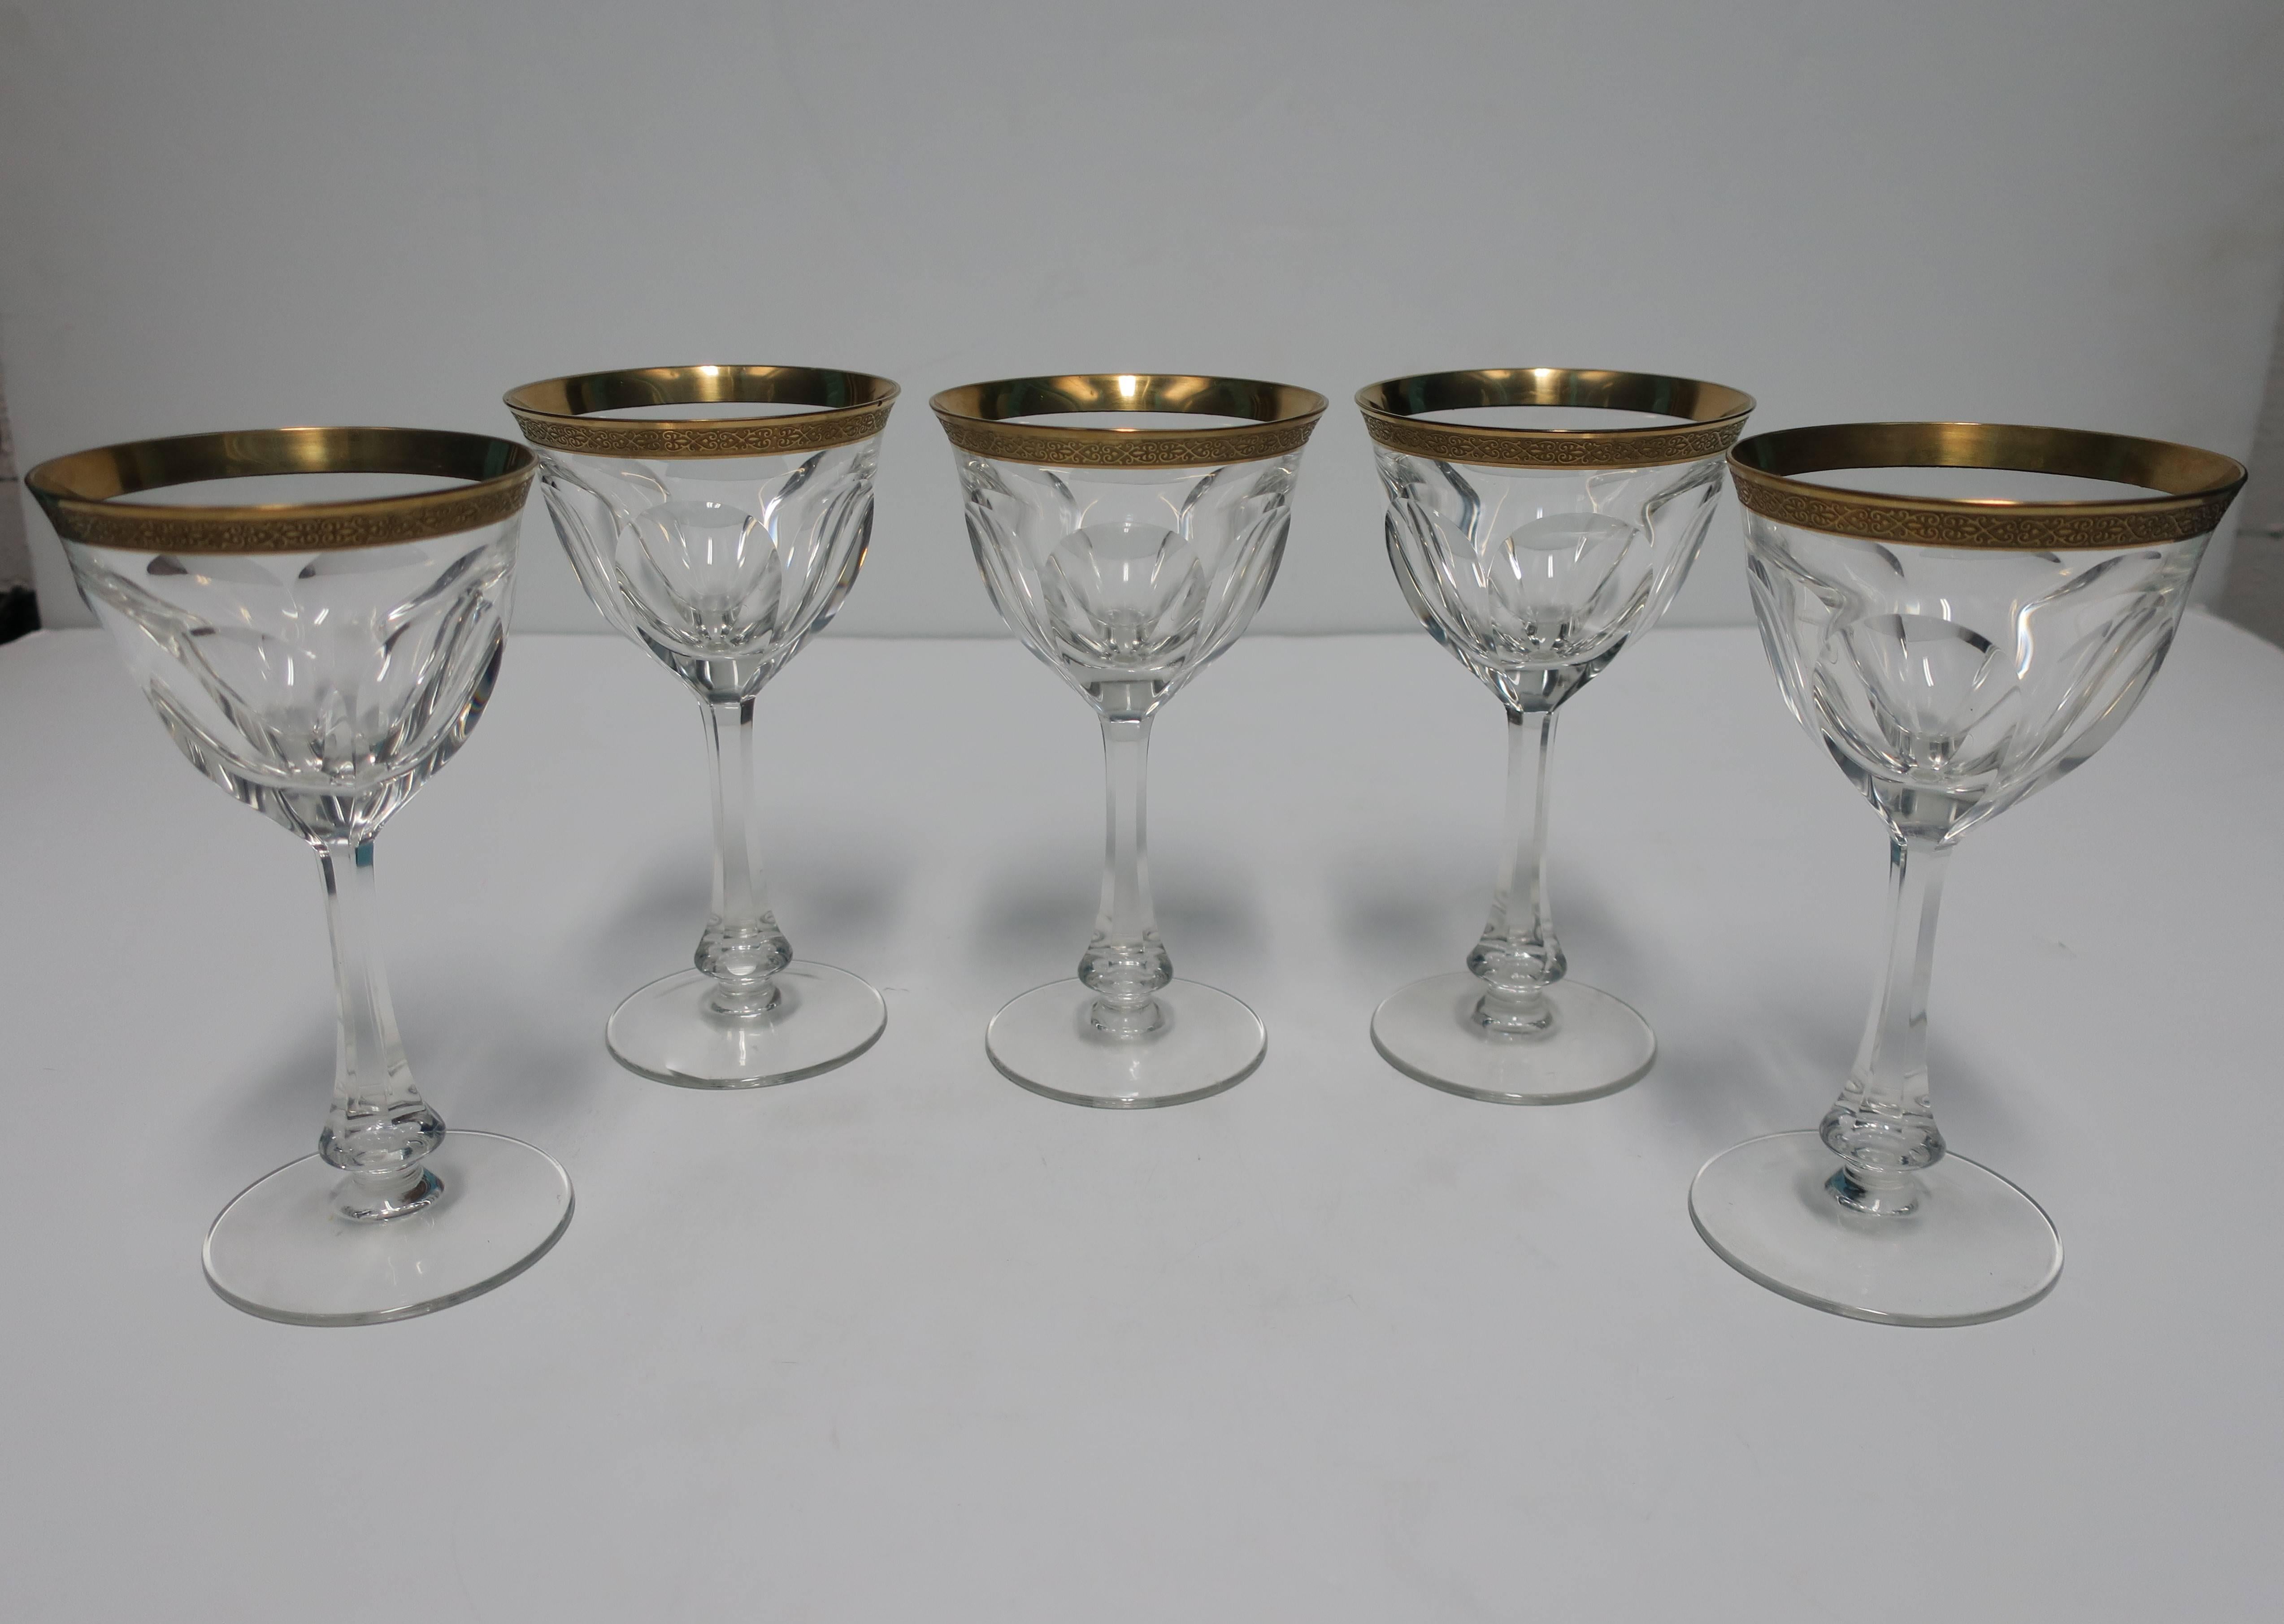 A beautiful set of five vintage faceted substantial crystal glass wine or water goblets with a heavy gold embossed decorative gilded rim, in the style of Baccarat, circa early to Mid-Century 20th Century. 

Each measure 7 in. H

Set of five